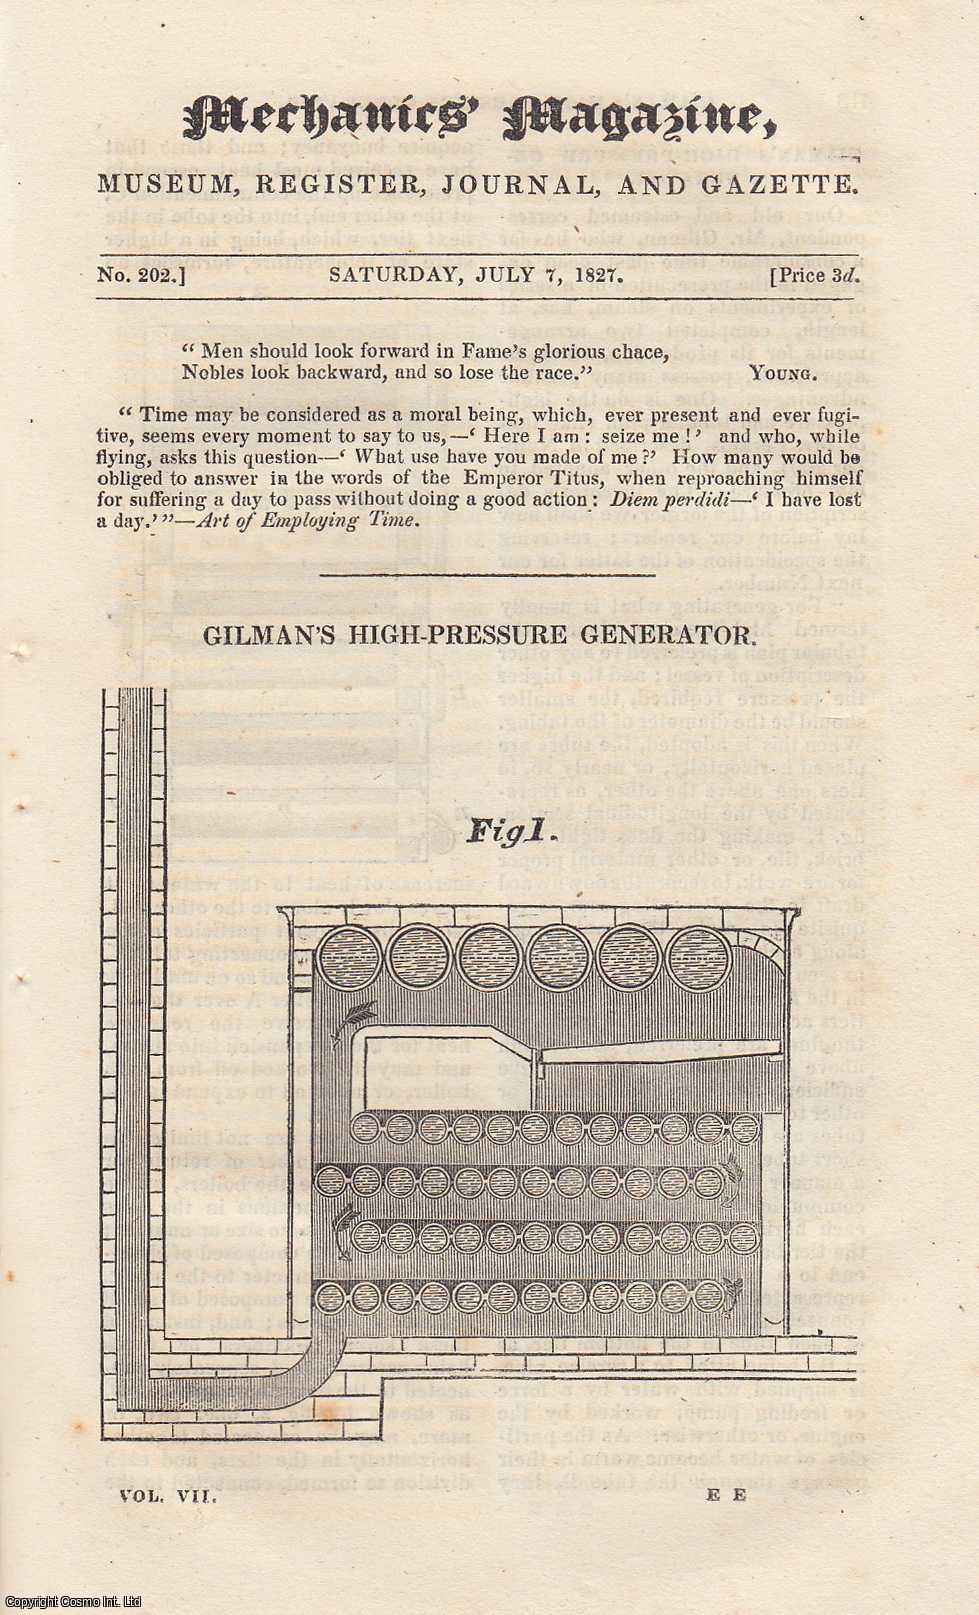 MECHANICS MAGAZINE - Gilman's High-Pressure Generator; Cure of Smoky Chimneys; Separating Wax and Honey From The Comb; Preserving Butterflies; Forest Bee hives, etc. Mechanics Magazine, Museum, Register, Journal and Gazette. Issue No. 202. A complete rare weekly issue of the Mechanics' Magazine, 1827.